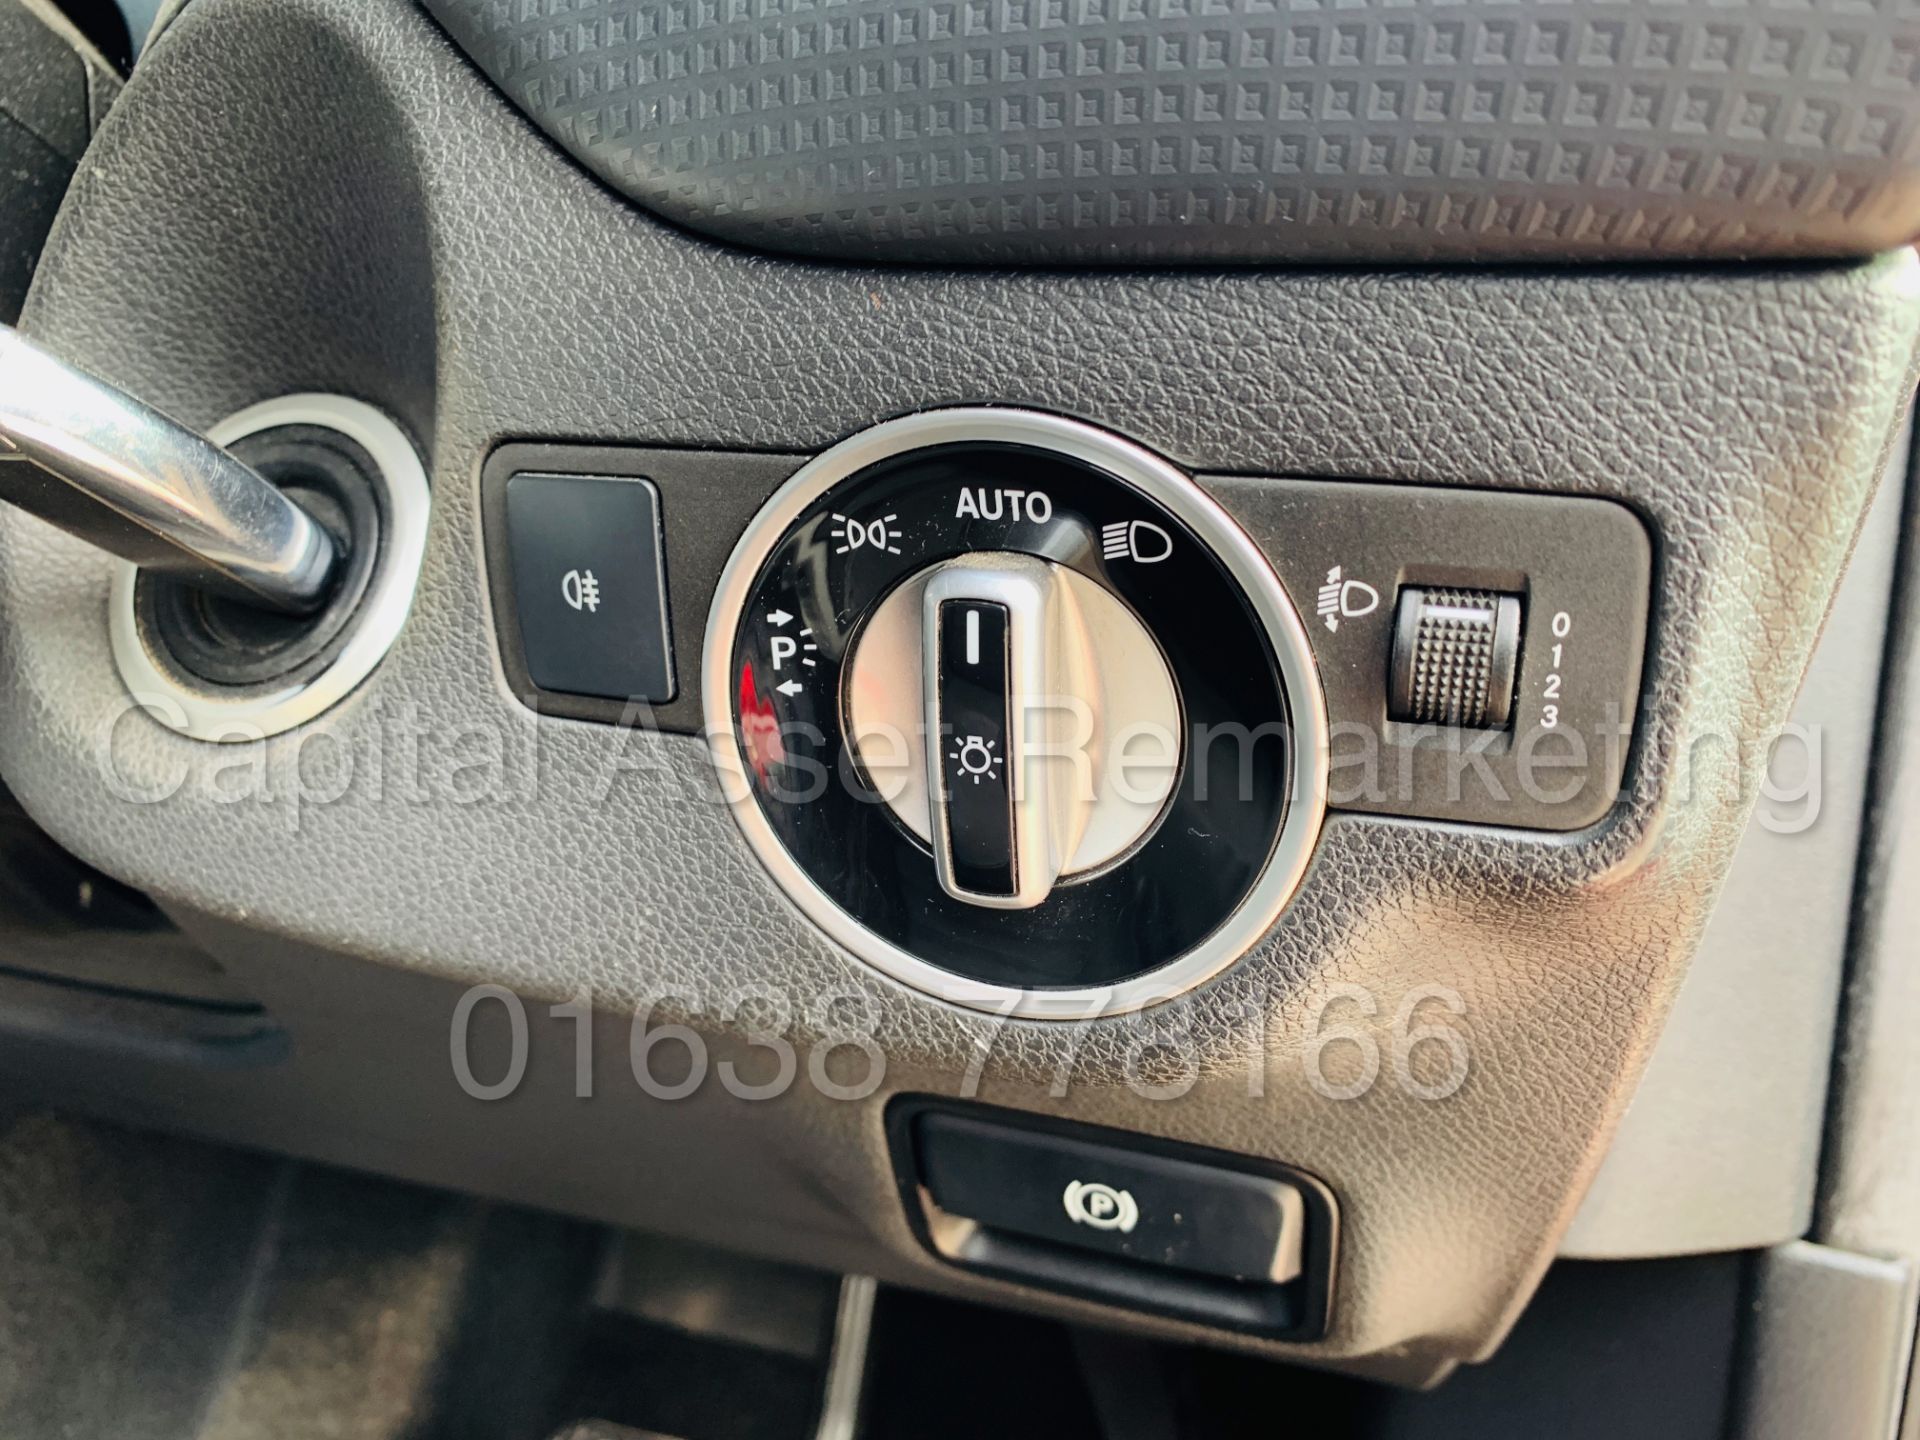 (ON SALE) MERCEDES-BENZ A180 *5 DOOR HATCHBACK* (2015 - NEW MODEL) '1.5 CDI - 7-G TRONIC AUTO' - Image 31 of 43